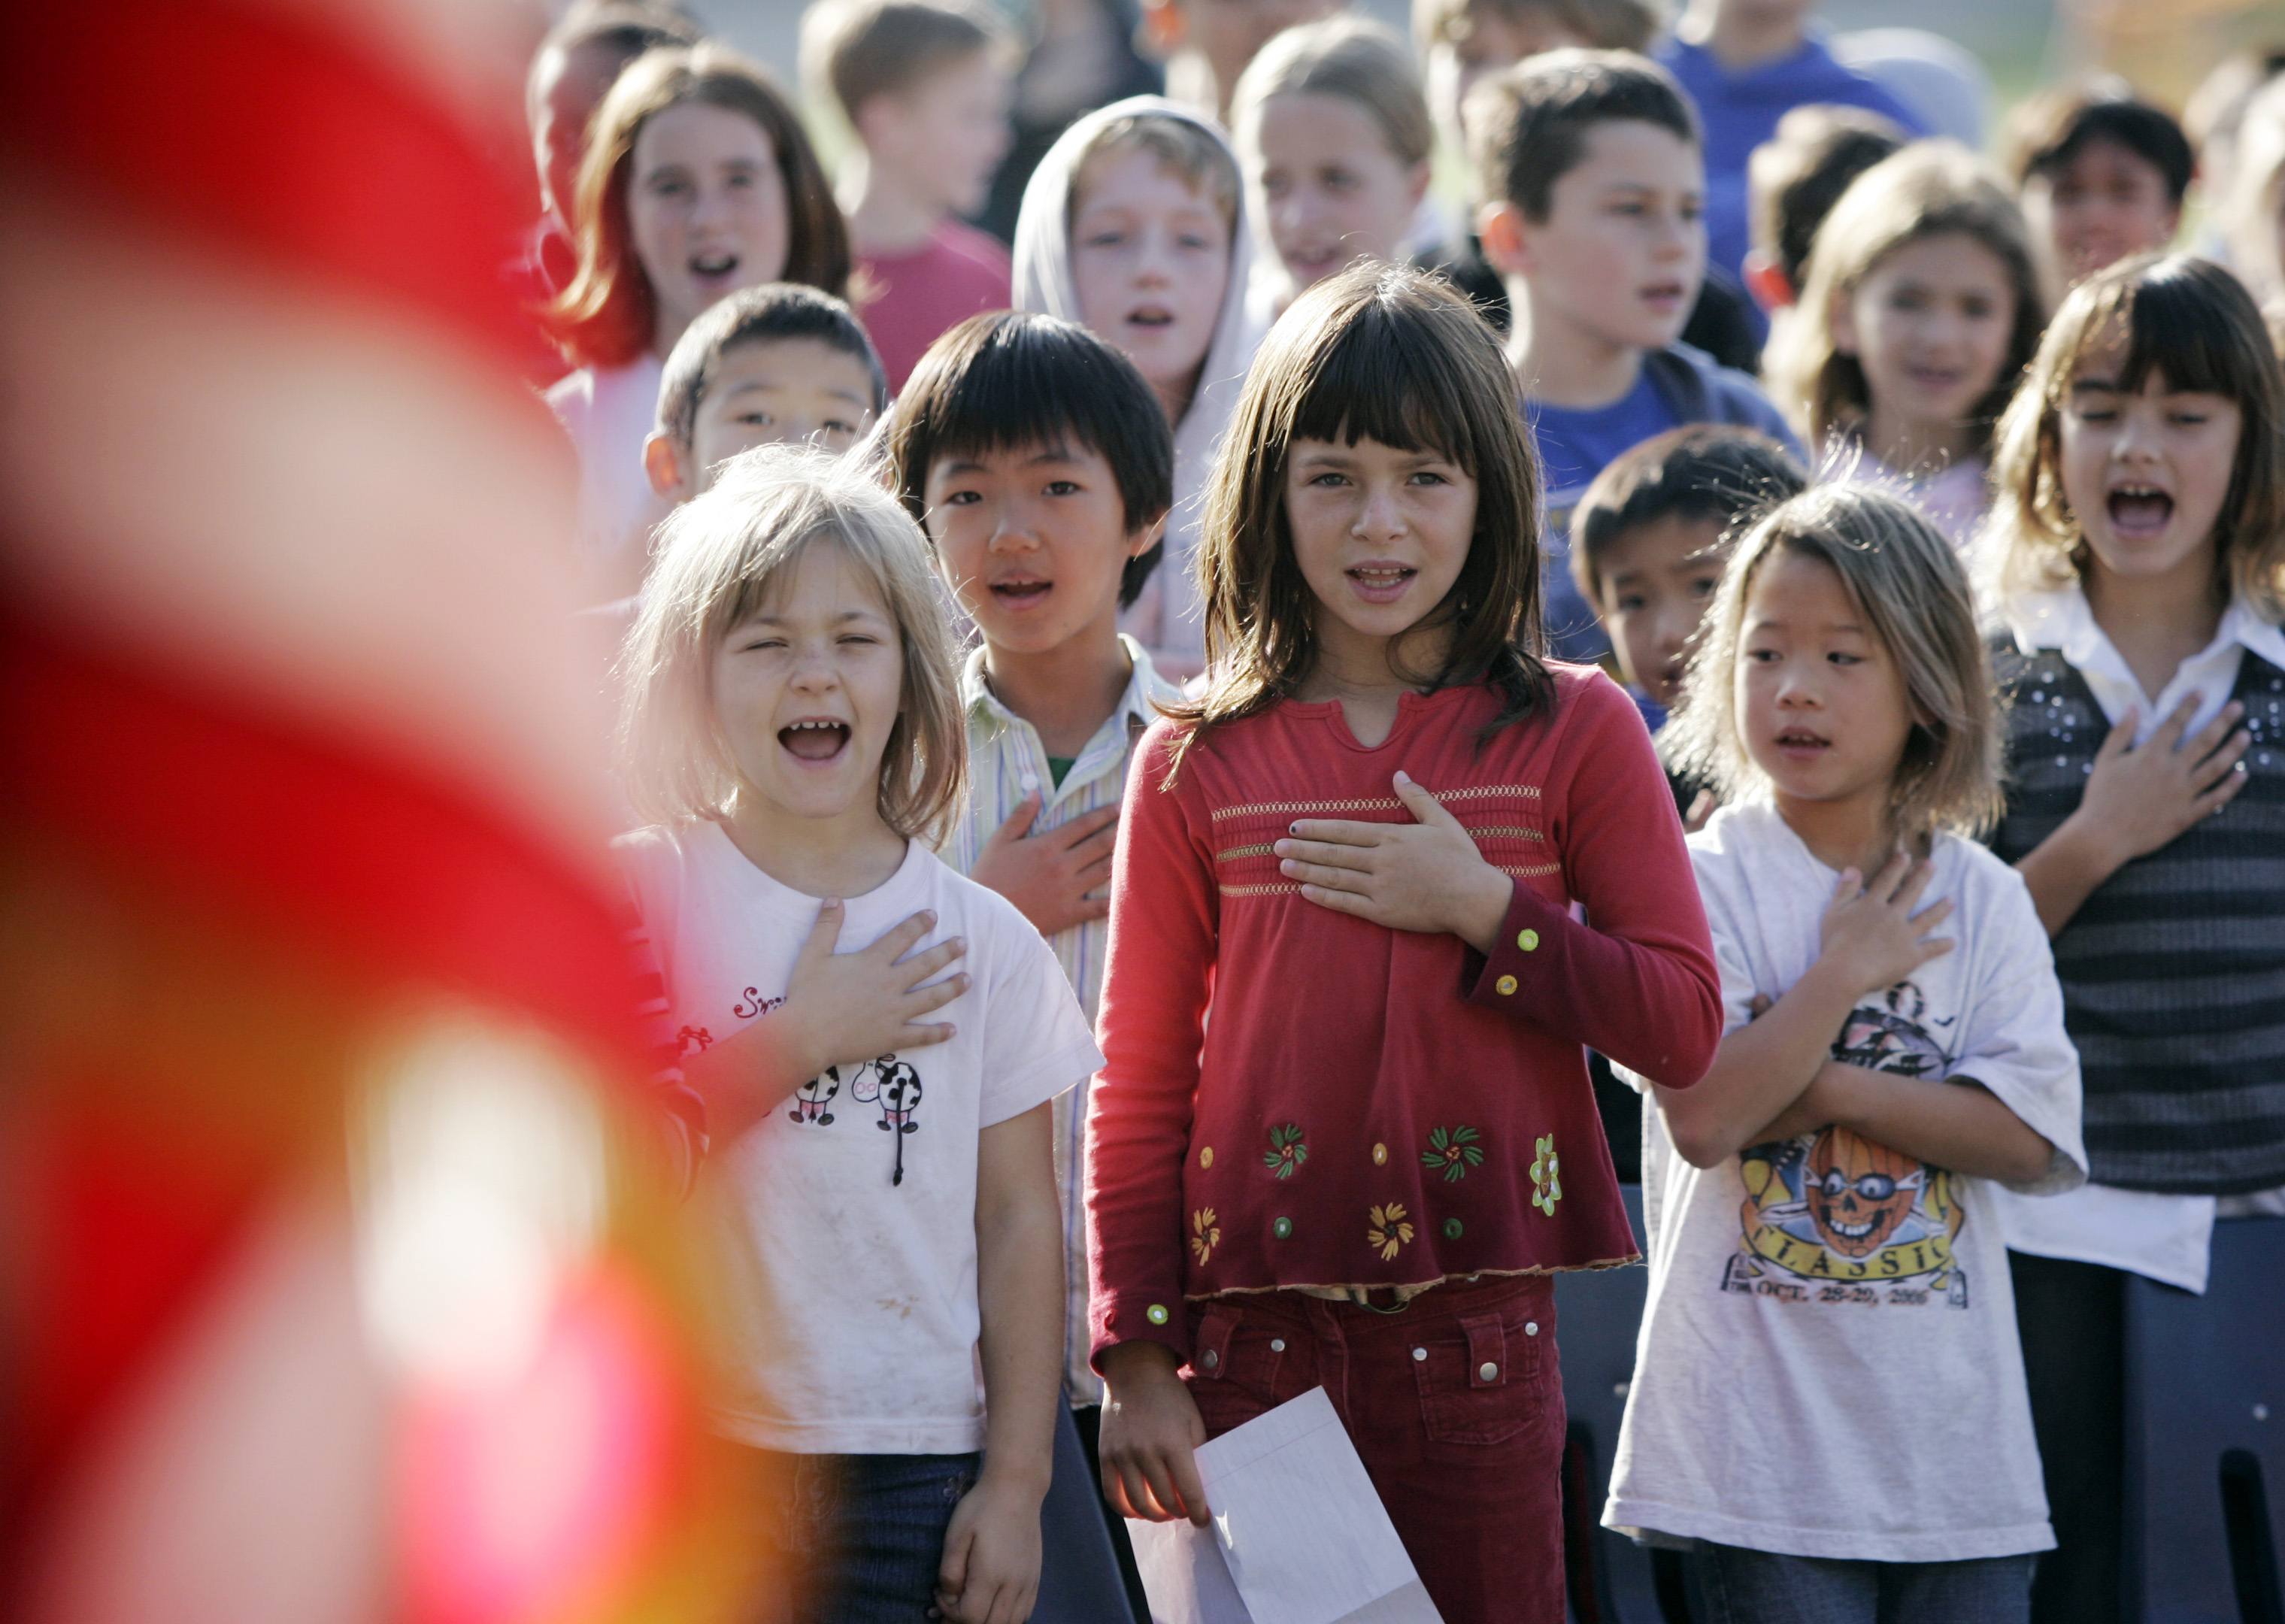 Fairmeadow Elementary School students recite the Pledge of Allegiance during a school assembly in Palo Alto, Calif., Monday, Nov. 5, 2007. Micheal Newdow, a Sacramento doctor and lawyer, is seeking to remove the words "under God" from the Pledge of Allegiance and U.S. currency. He is taking his arguments back to a federal appeals court on Tuesday, Dec. 4. (AP Photo/Paul Sakuma)